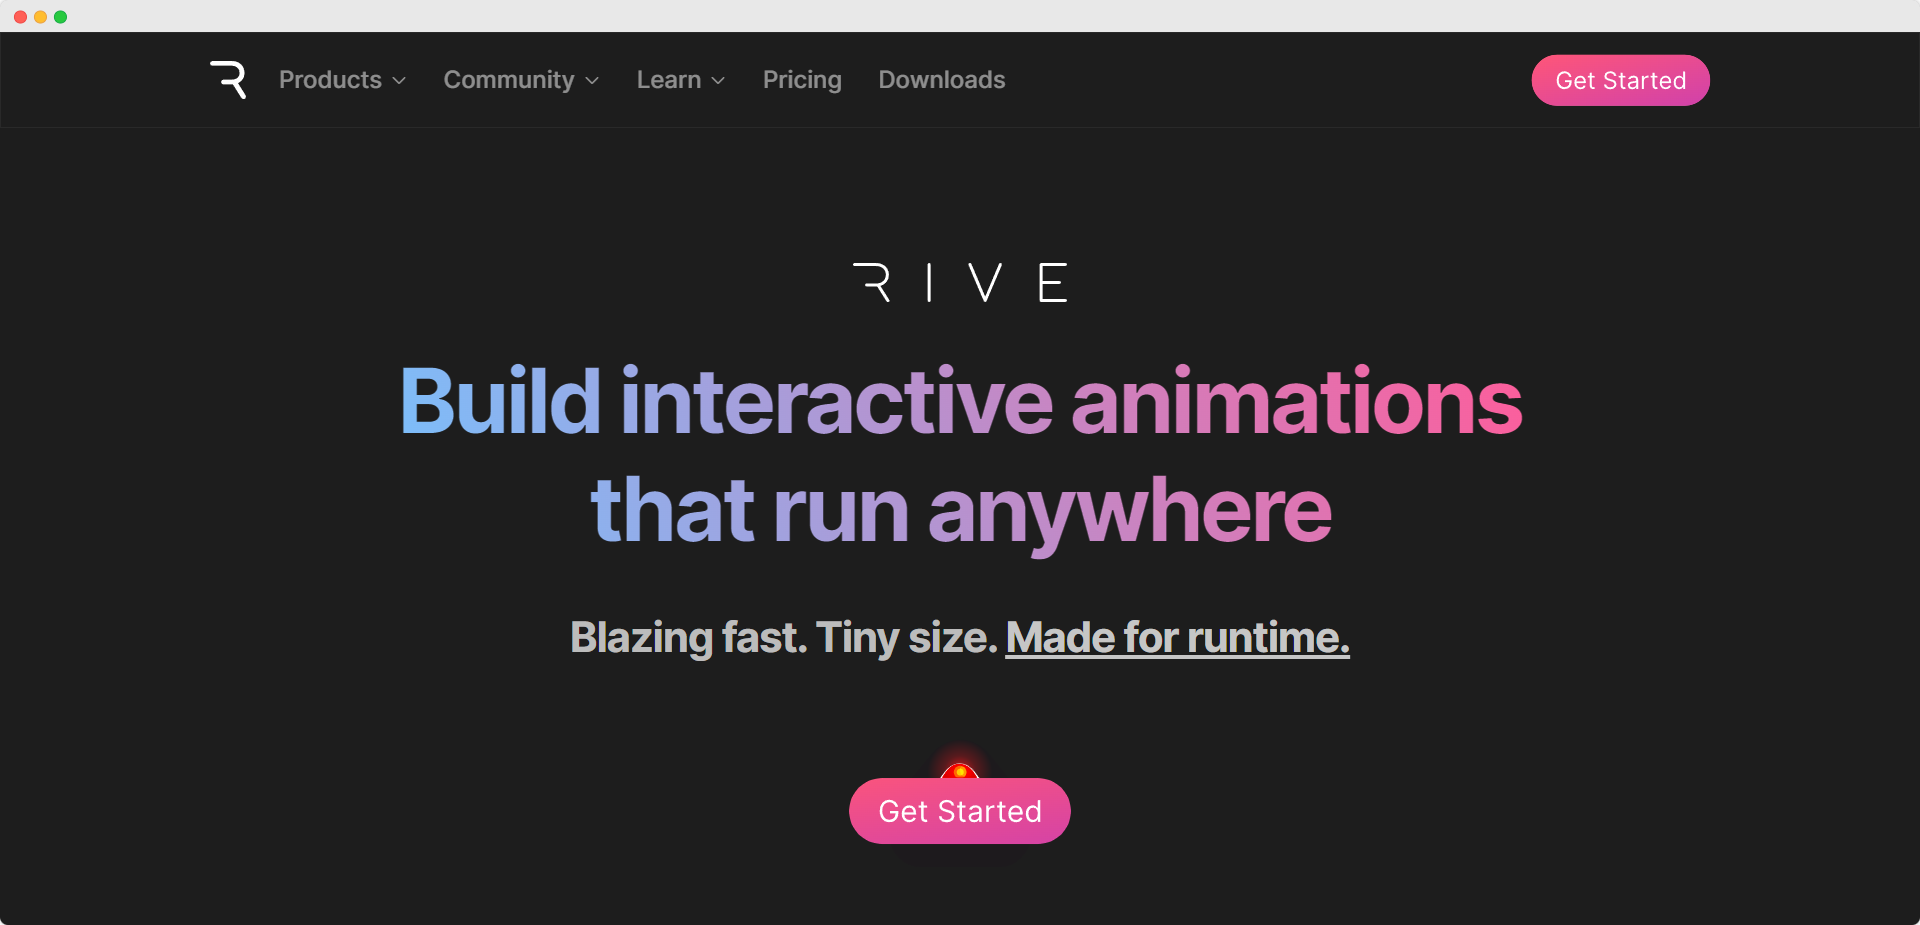 Rive animation software